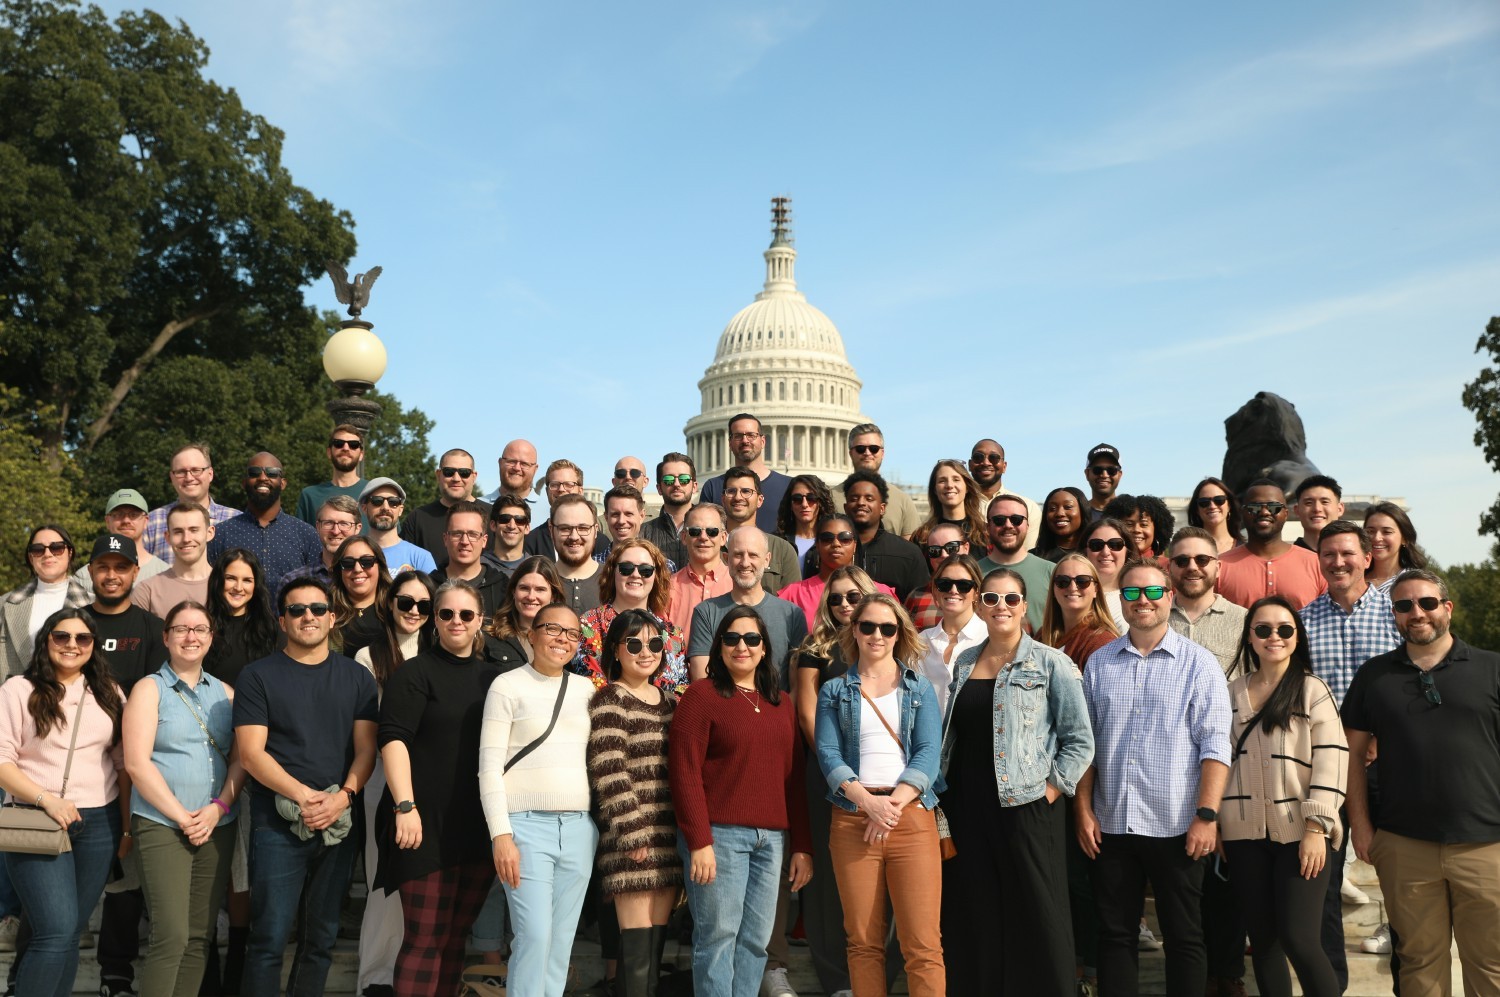 While in Washington D.C. for Osano's Team Trip, Osanians took a tour of the U.S. Capitol!